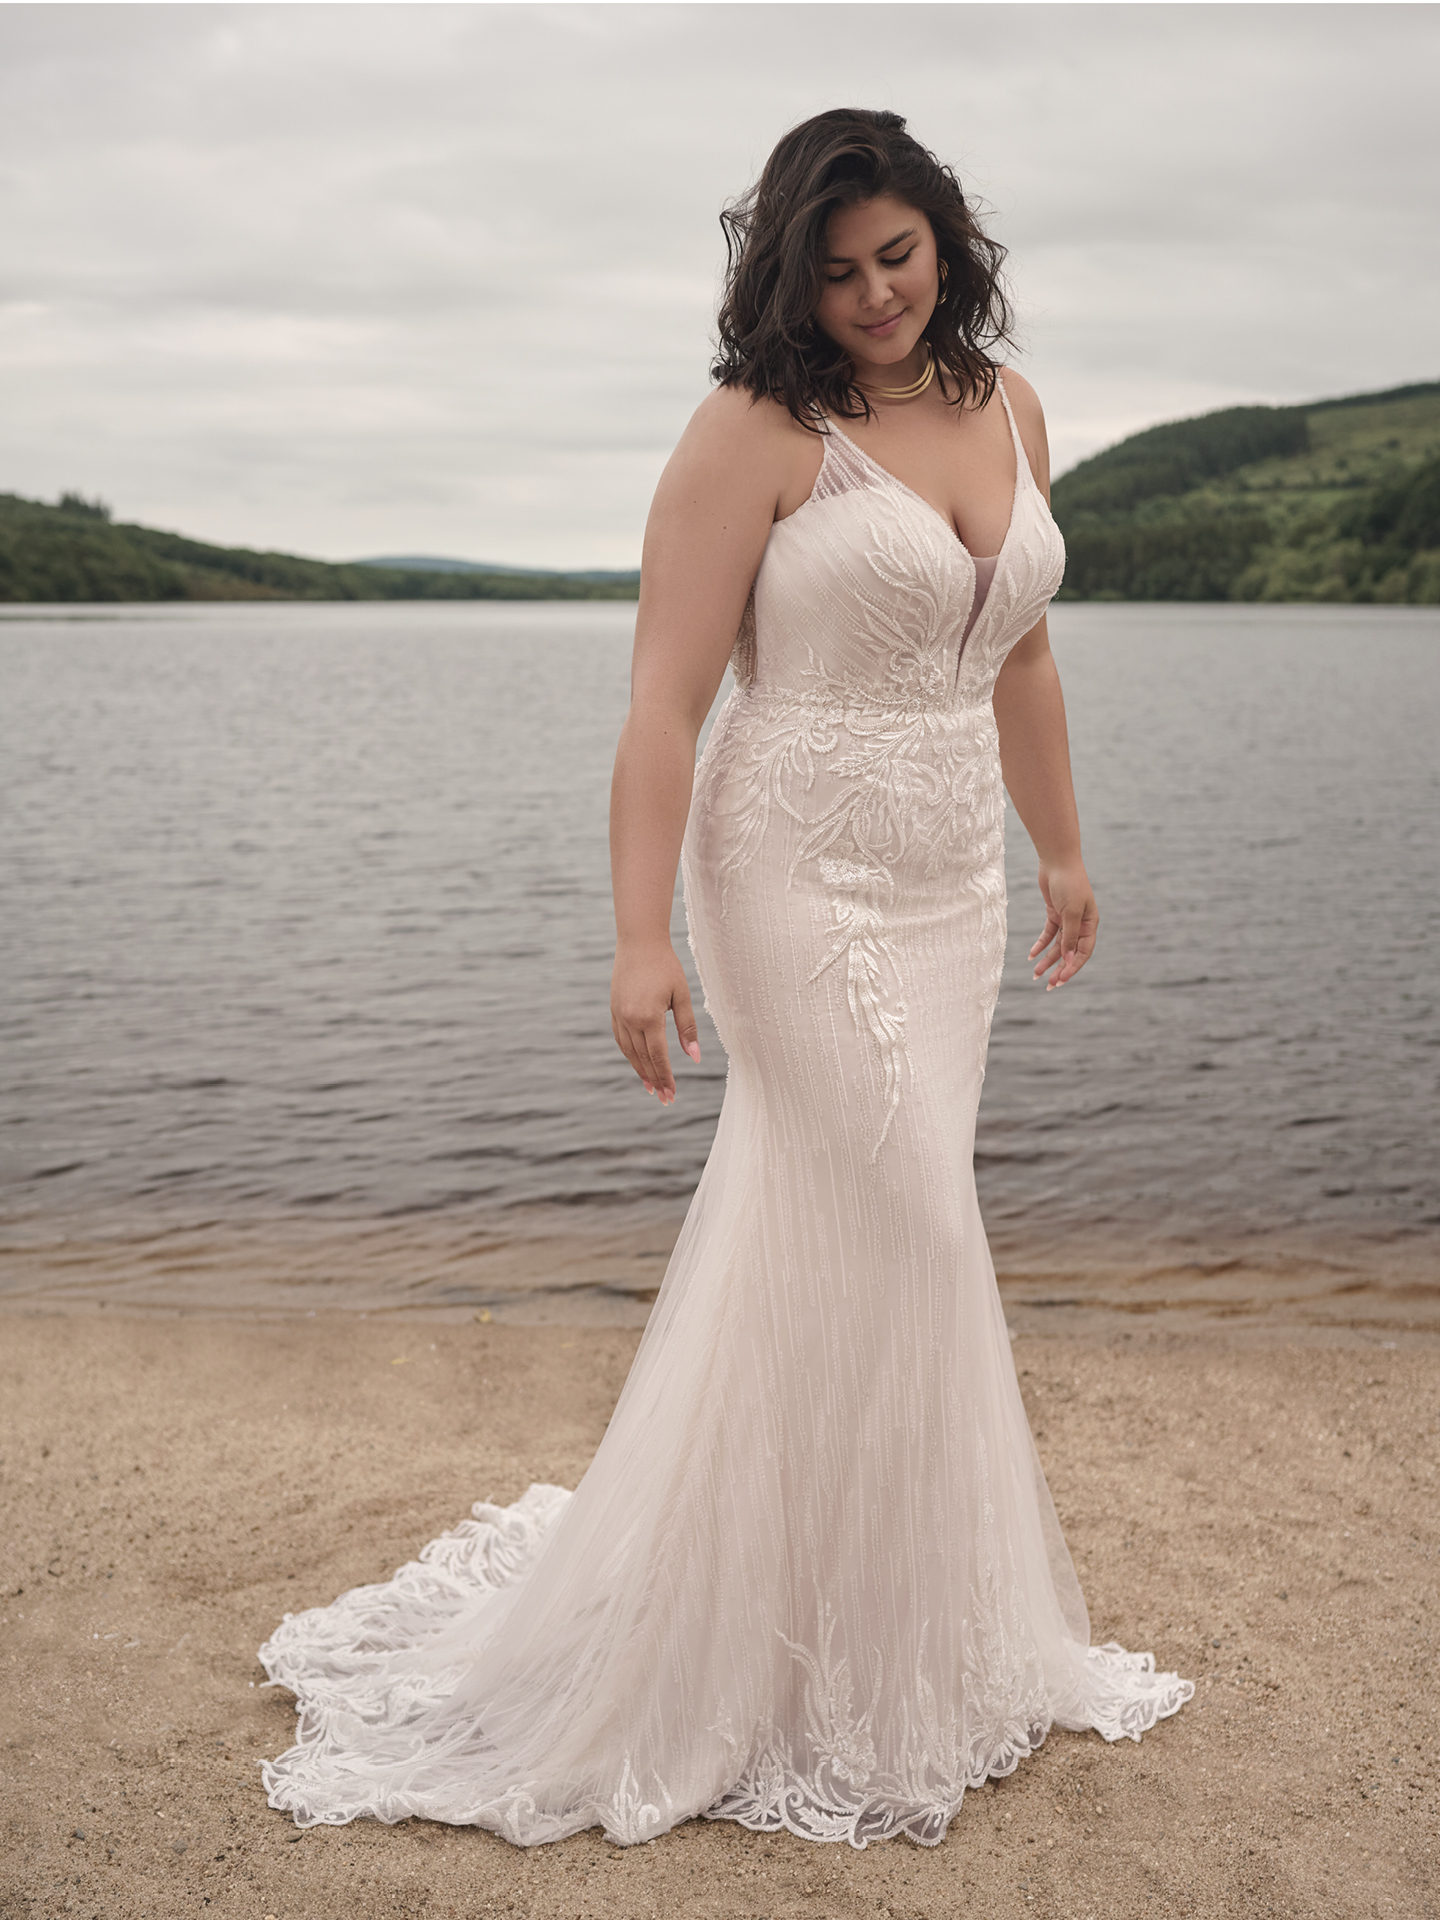 Bride In Beaded Wedding Dress Called Luella By Sottero And Midgley